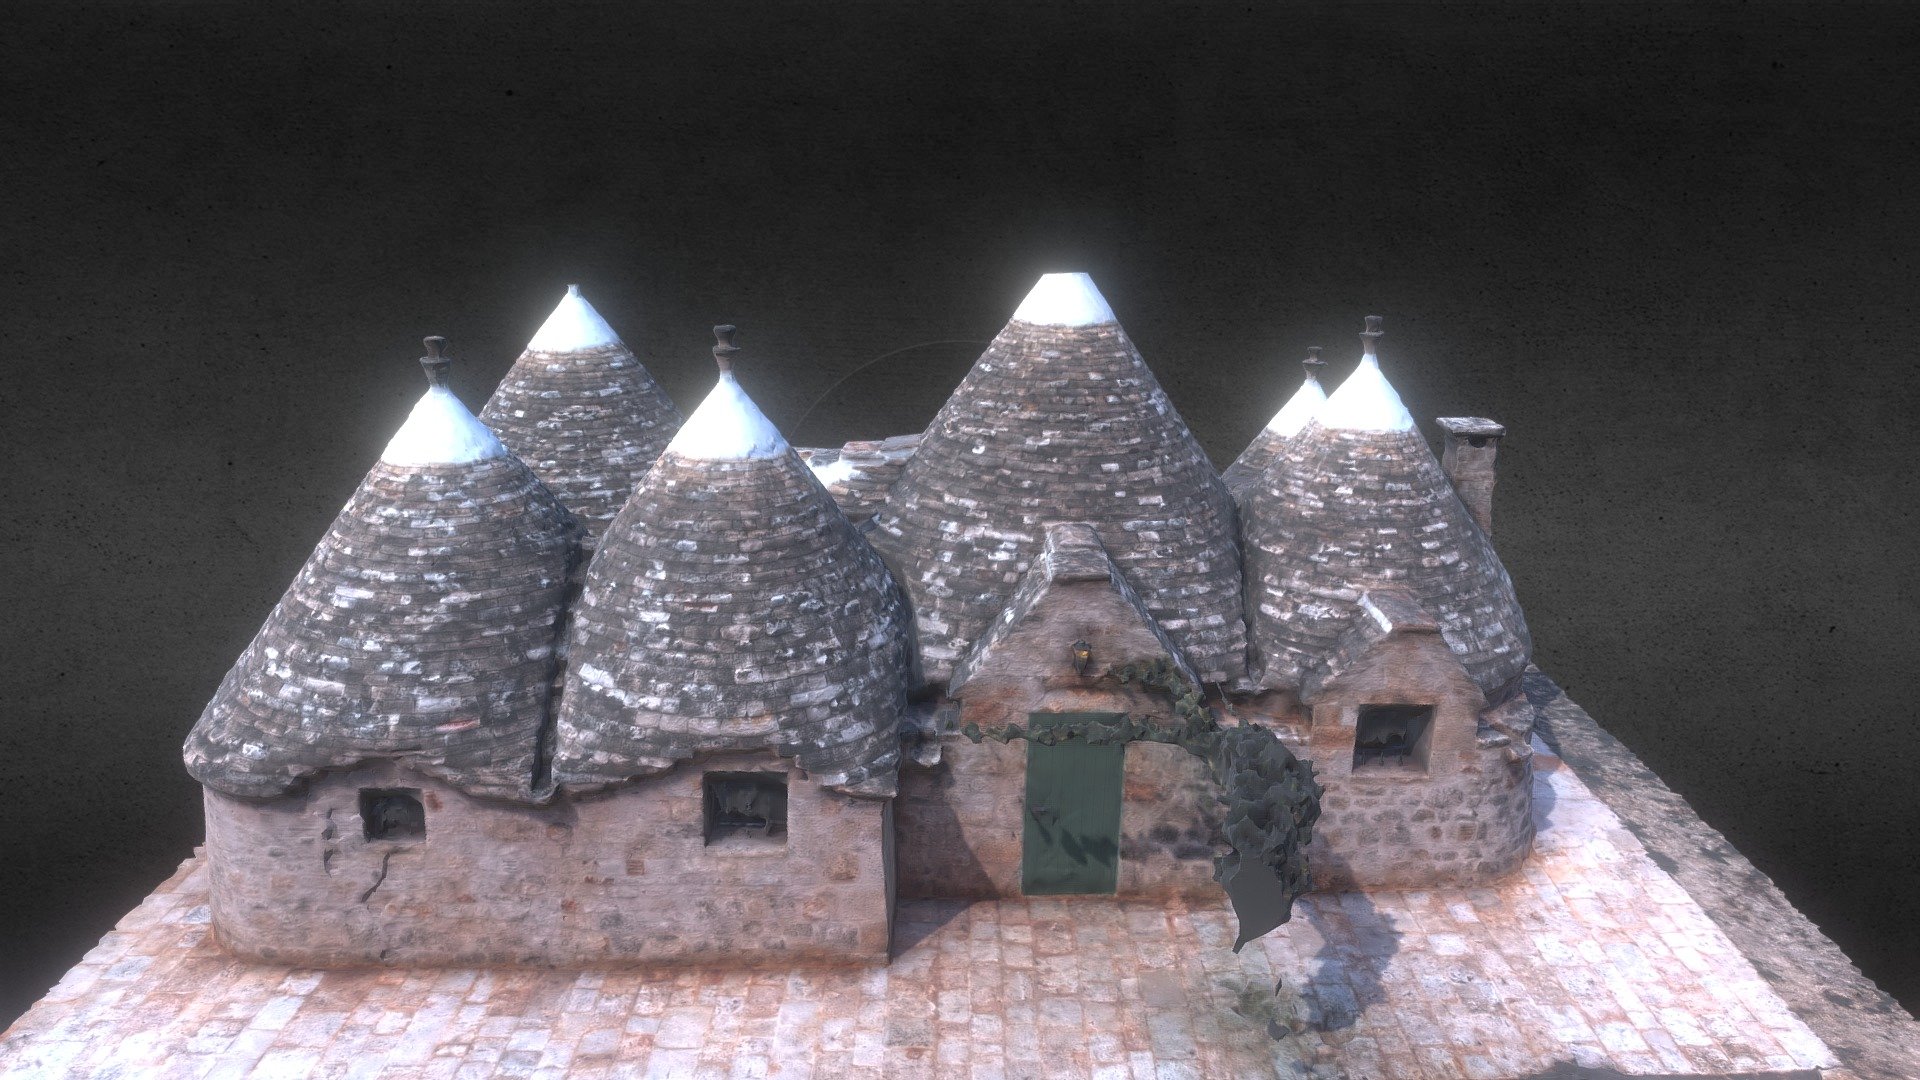 A trullo is a traditional Apulian dry stone hut with a conical roof. Their style of construction is specific to the Itria Valley, in the Murge area of the Italian region of Apulia. Trulli generally were constructed as temporary field shelters and storehouses or, as permanent dwellings by small proprietors or agricultural labourers. In the town of Alberobello, in the province of Bari, whole districts contain dense concentrations of trulli. The golden age of trulli was the nineteenth century, especially its final decades, which were marked by the development of wine growing 3d model